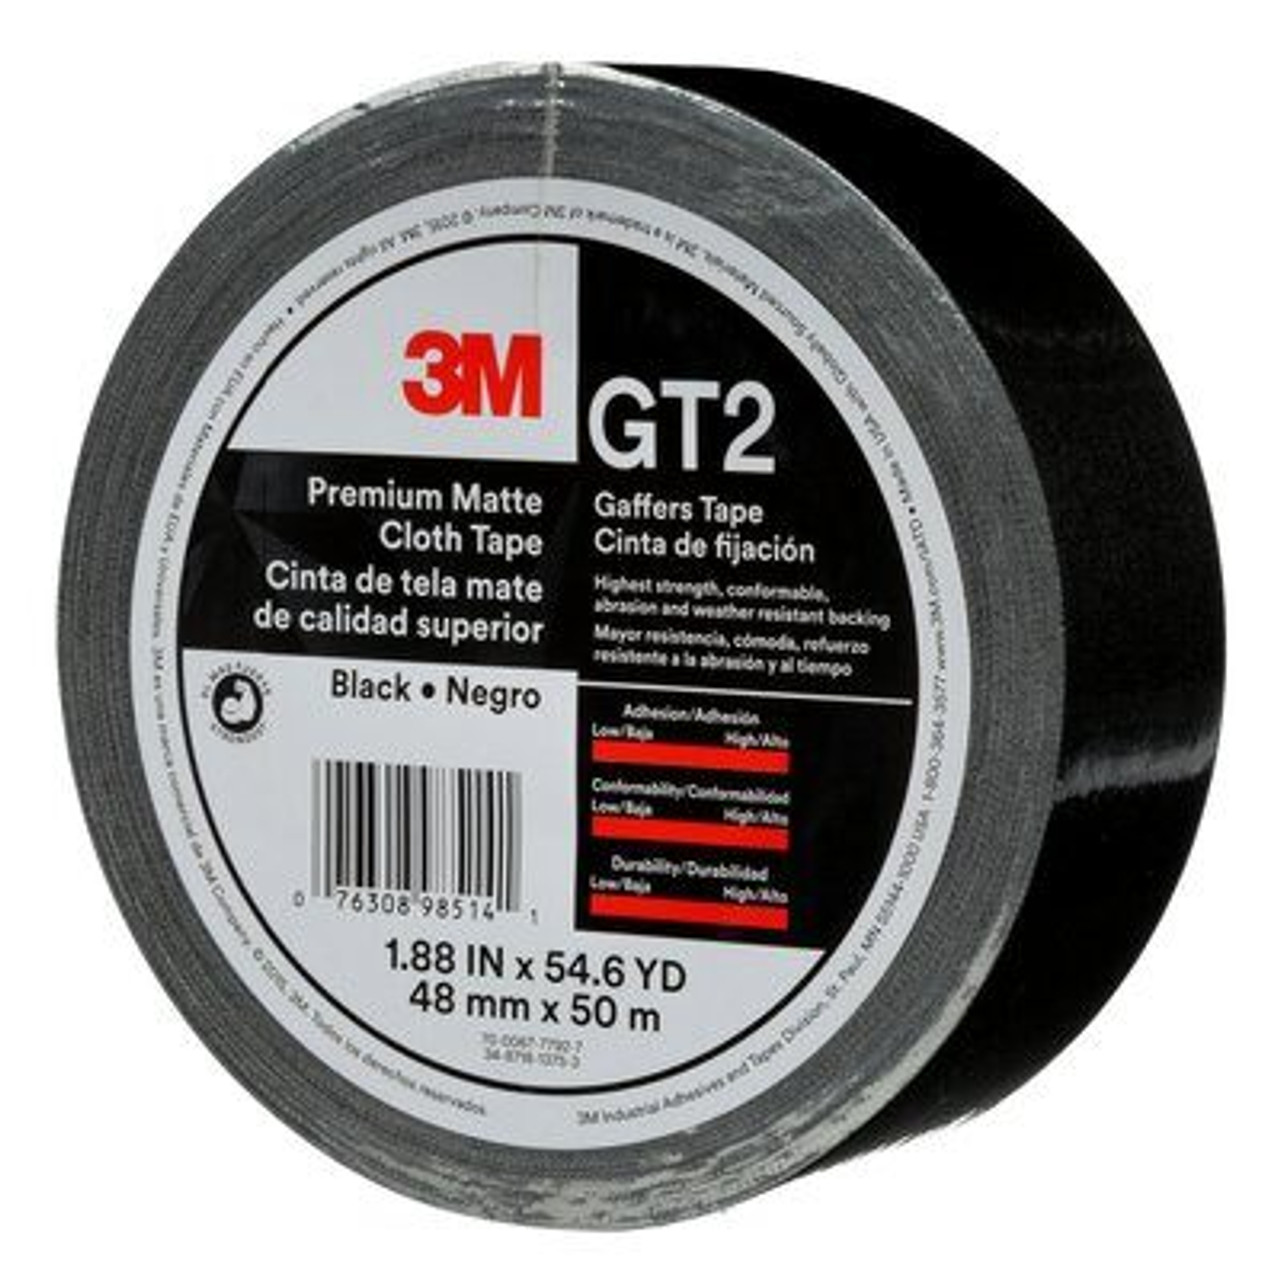 3M™ 850 High Strength Polyester Film Tape – Clean Removal, Black